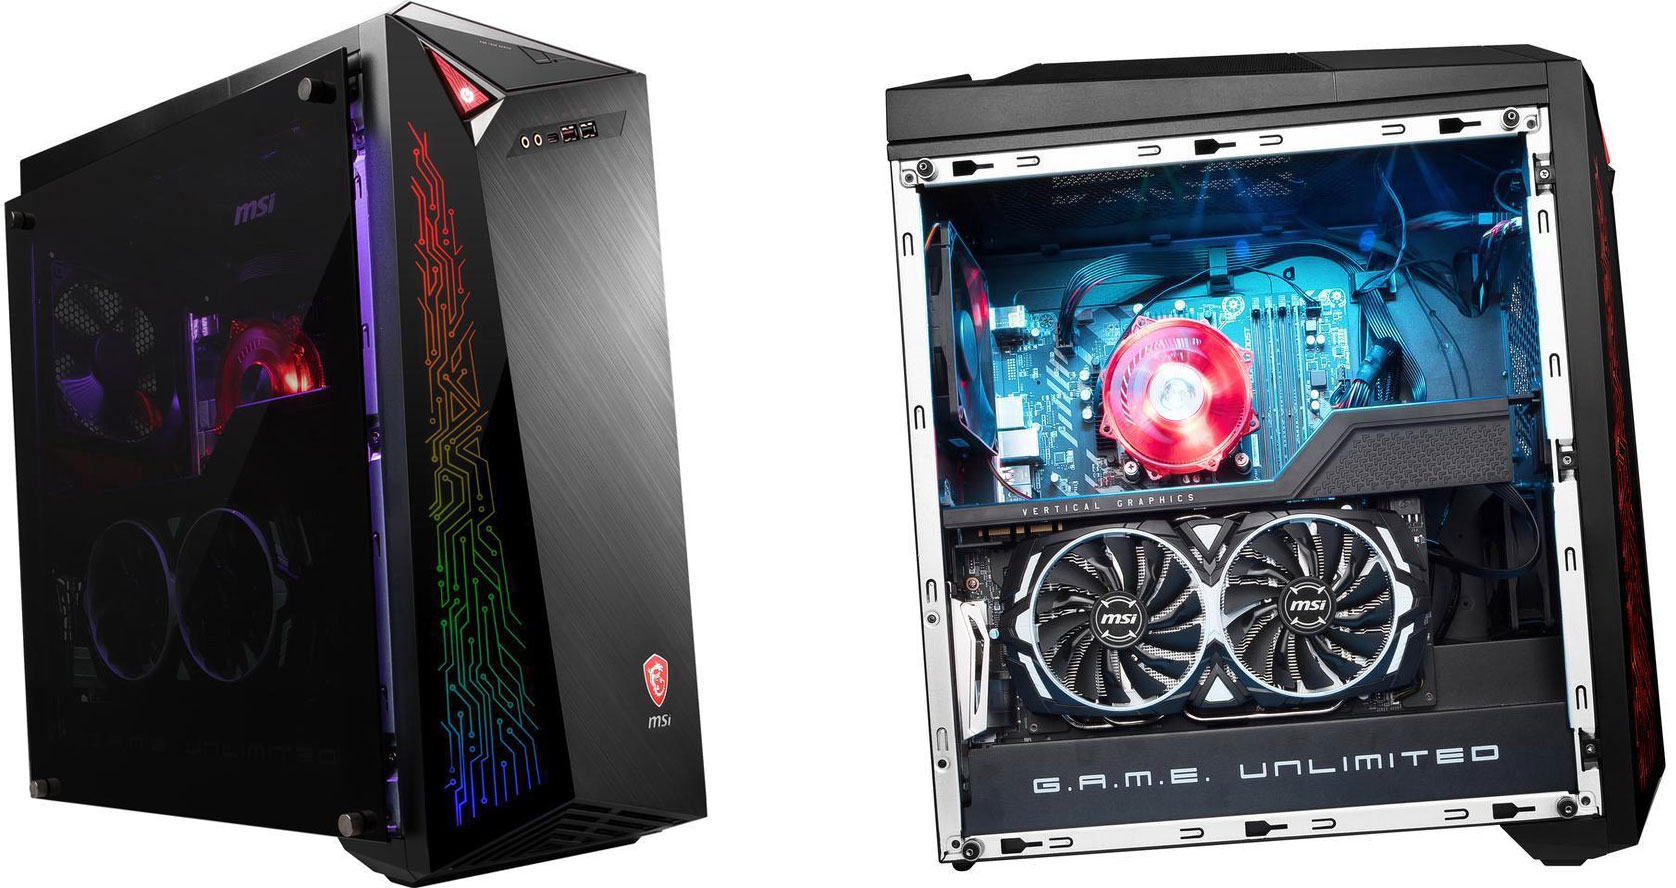 MSI's gaming desktop with a Core i7-8700 and GTX 1070 Ti is on